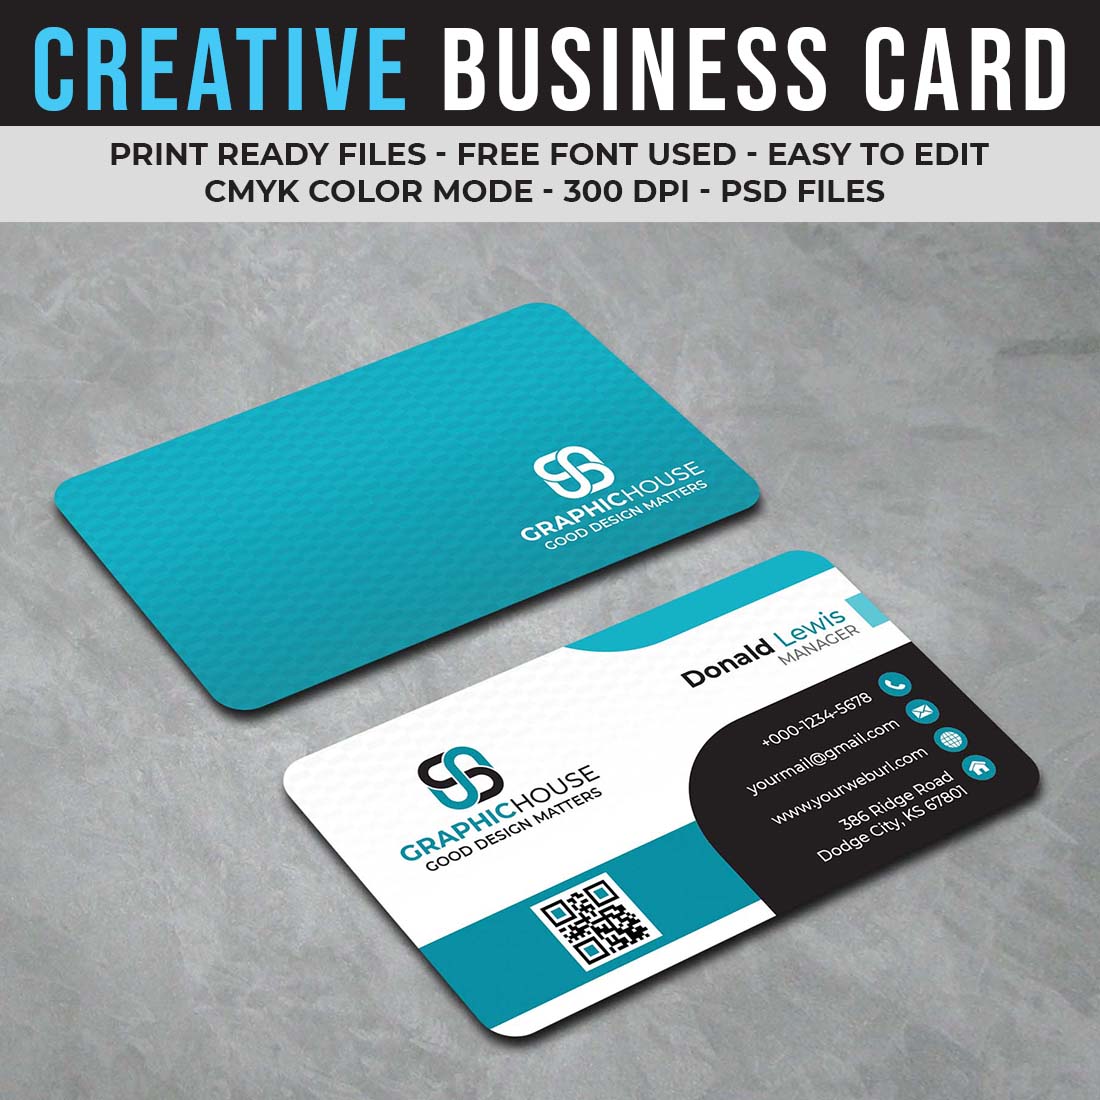 Professional Business Card Template CMYK cover image.